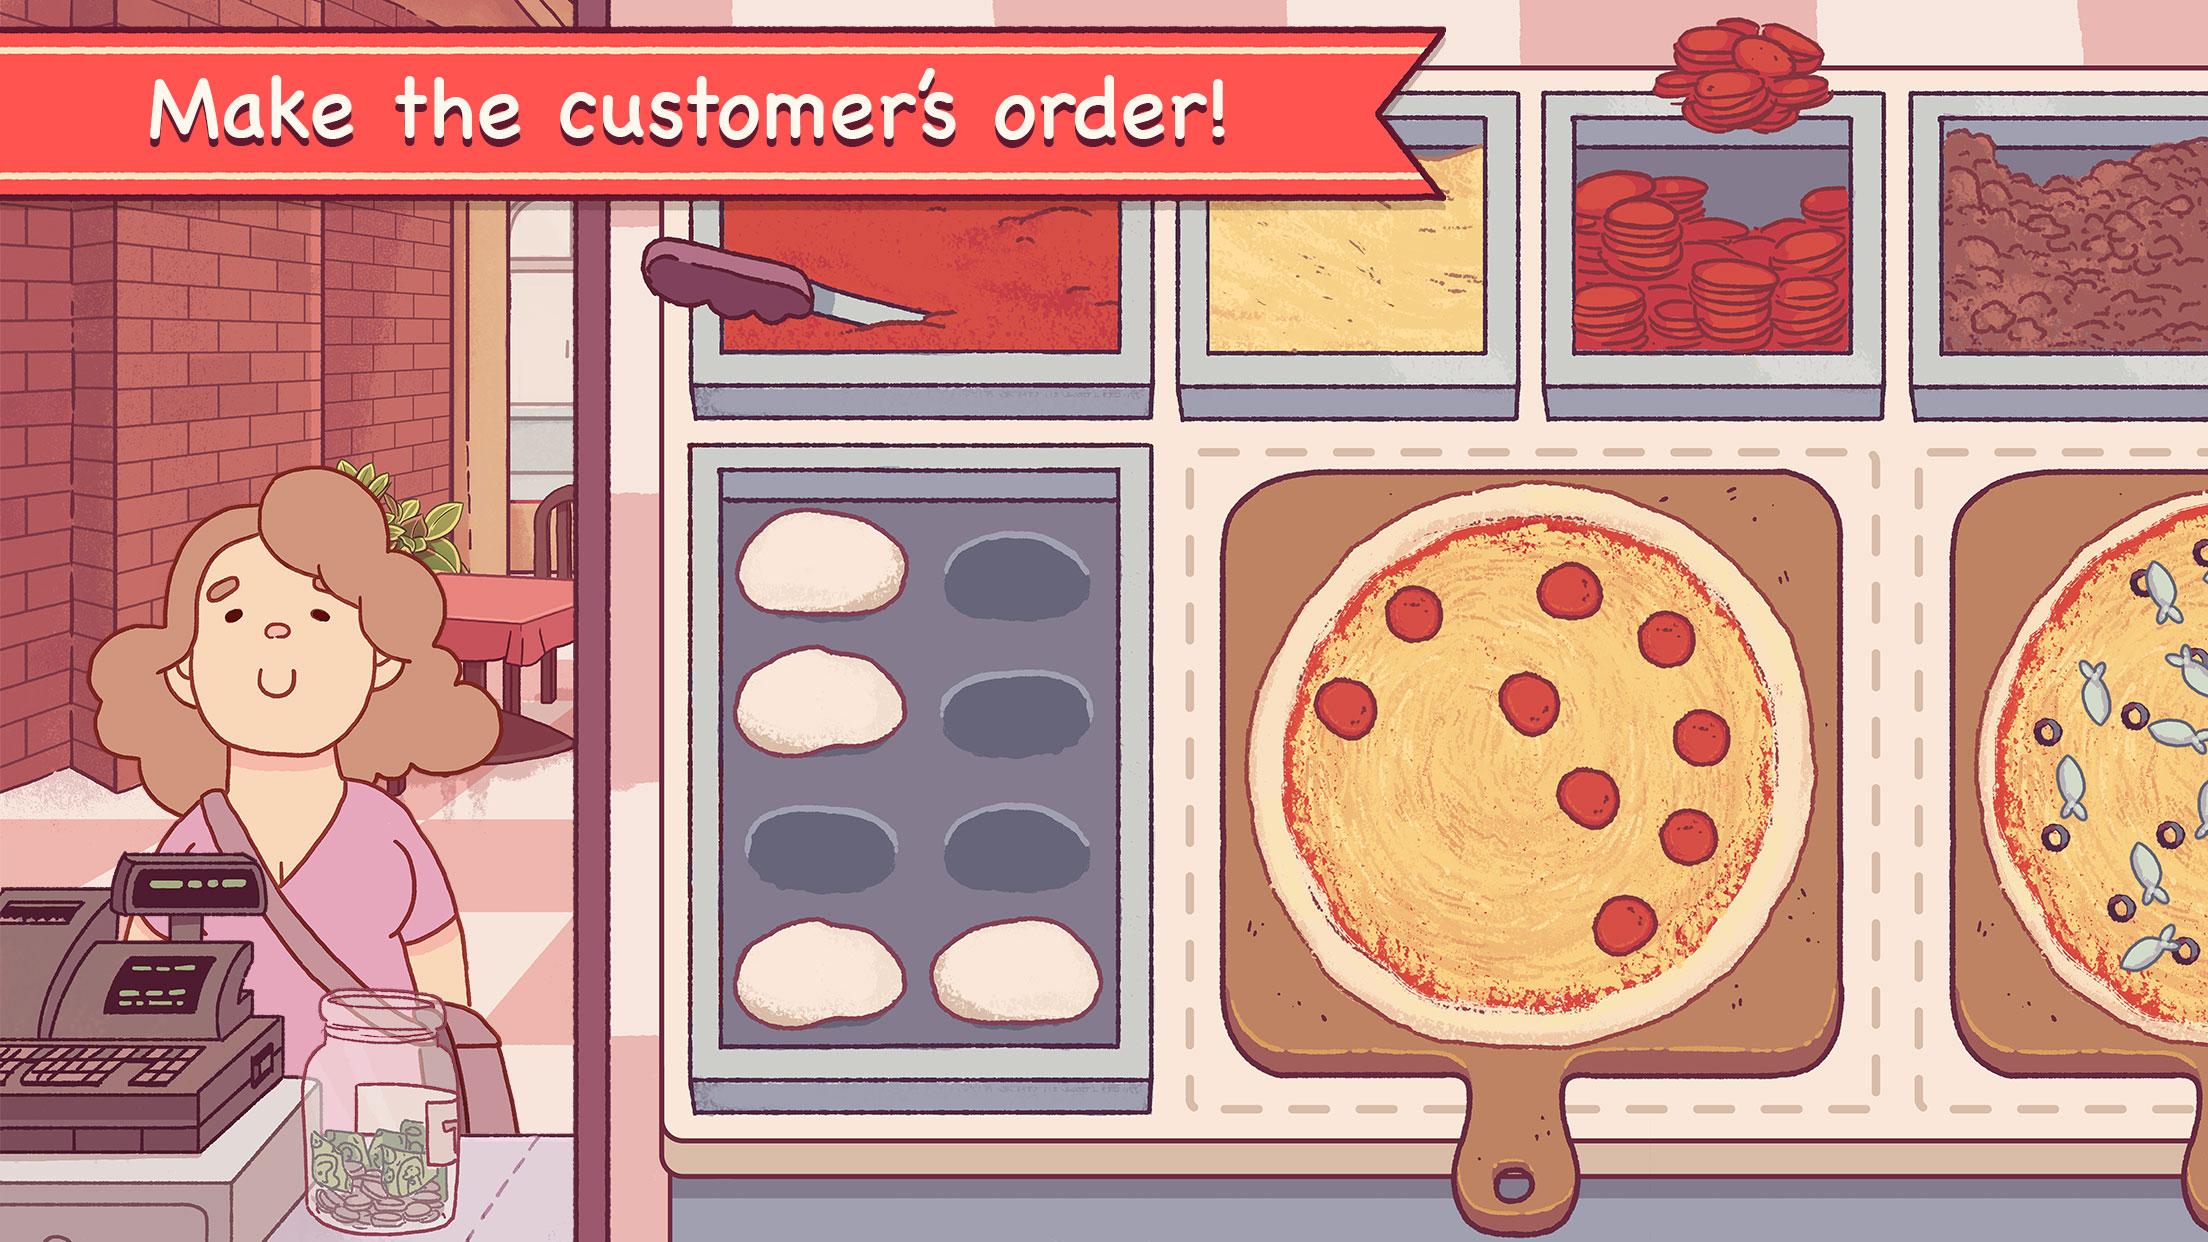 Make the customer's order - Good Pizza, Great Pizza